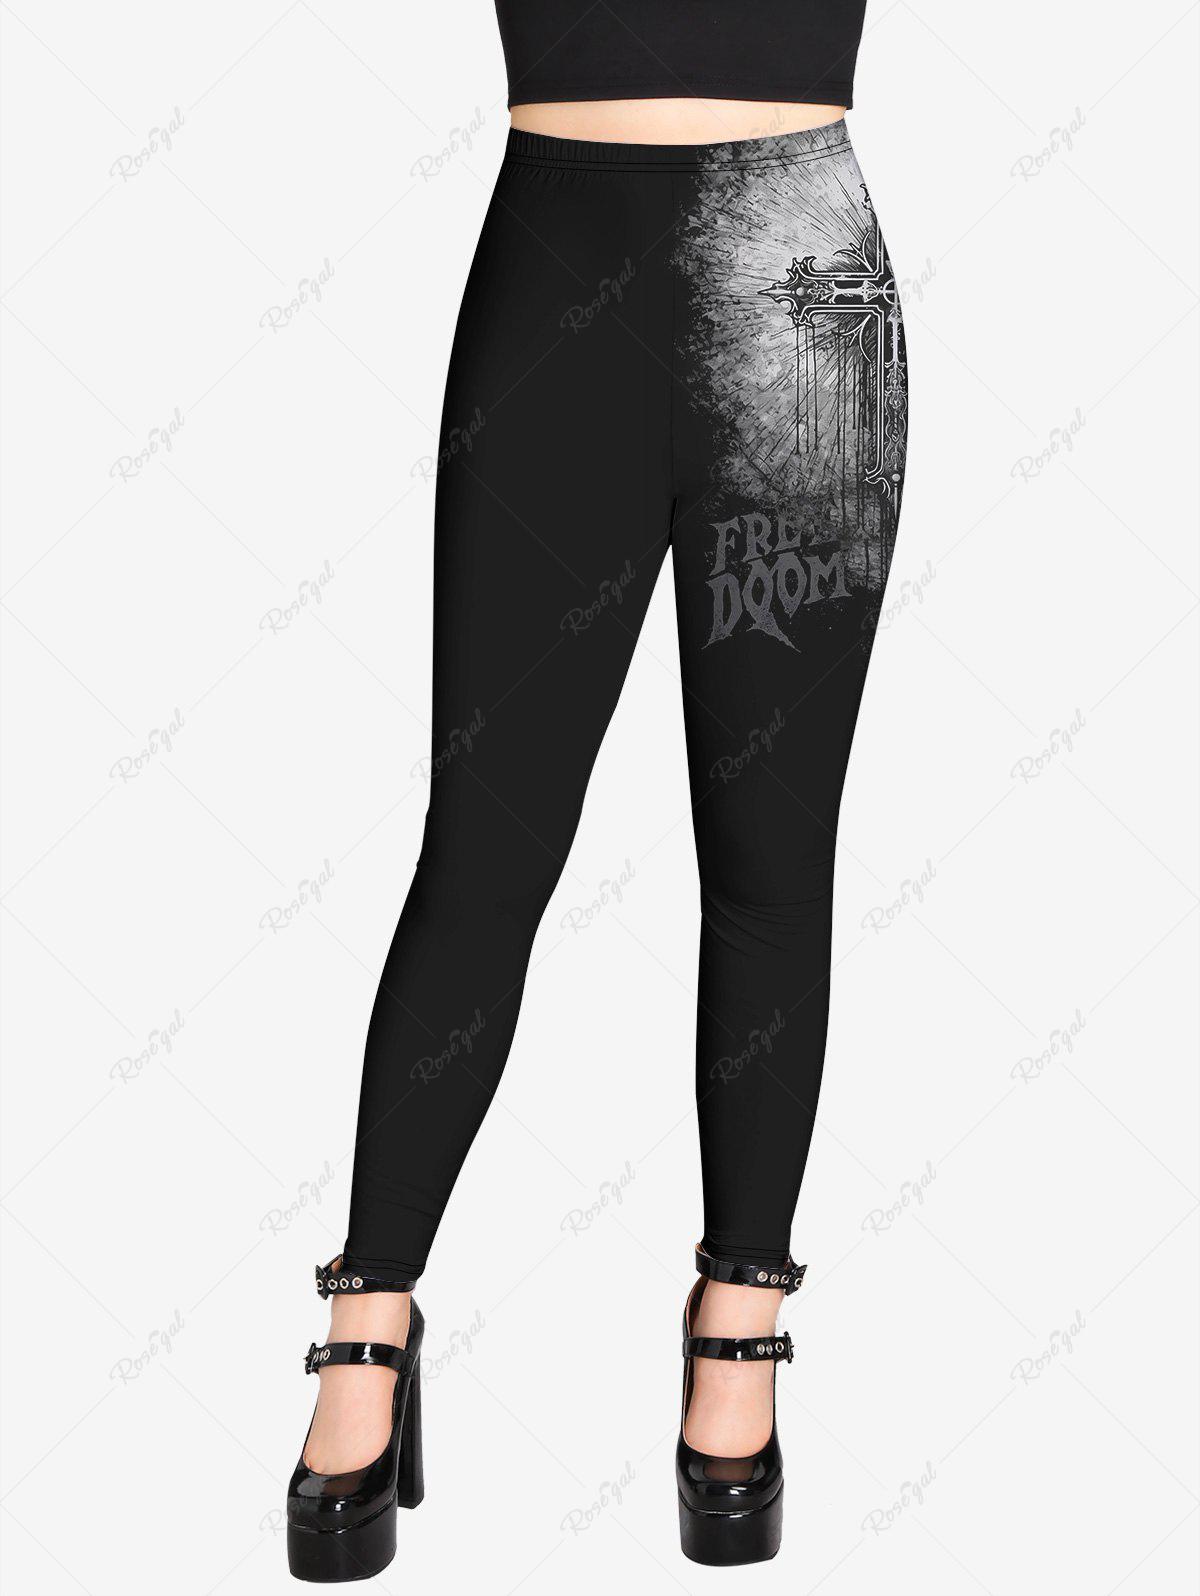 ZZXXB Butterfly Cheetah Print Cross Flare Leggings High Waist Women's  Casual Yoga Pants Bell Bottom Leggings Small Pink : Amazon.ca: Clothing,  Shoes & Accessories